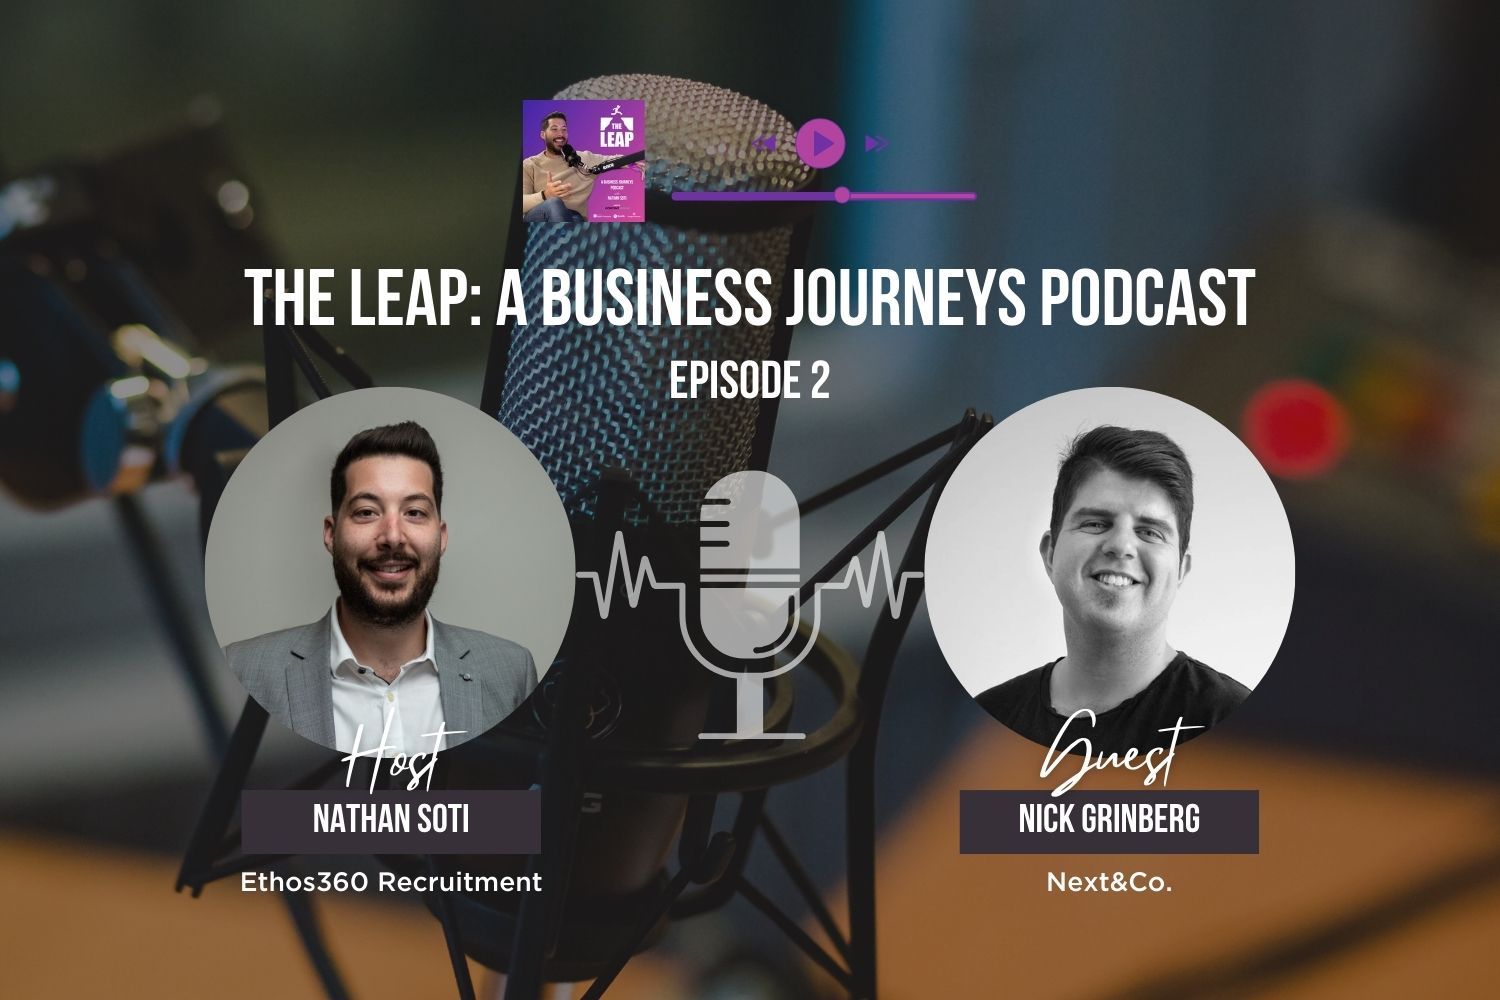 The Leap: A Business Journeys Podcast Episode 2 with Nick Grinberg